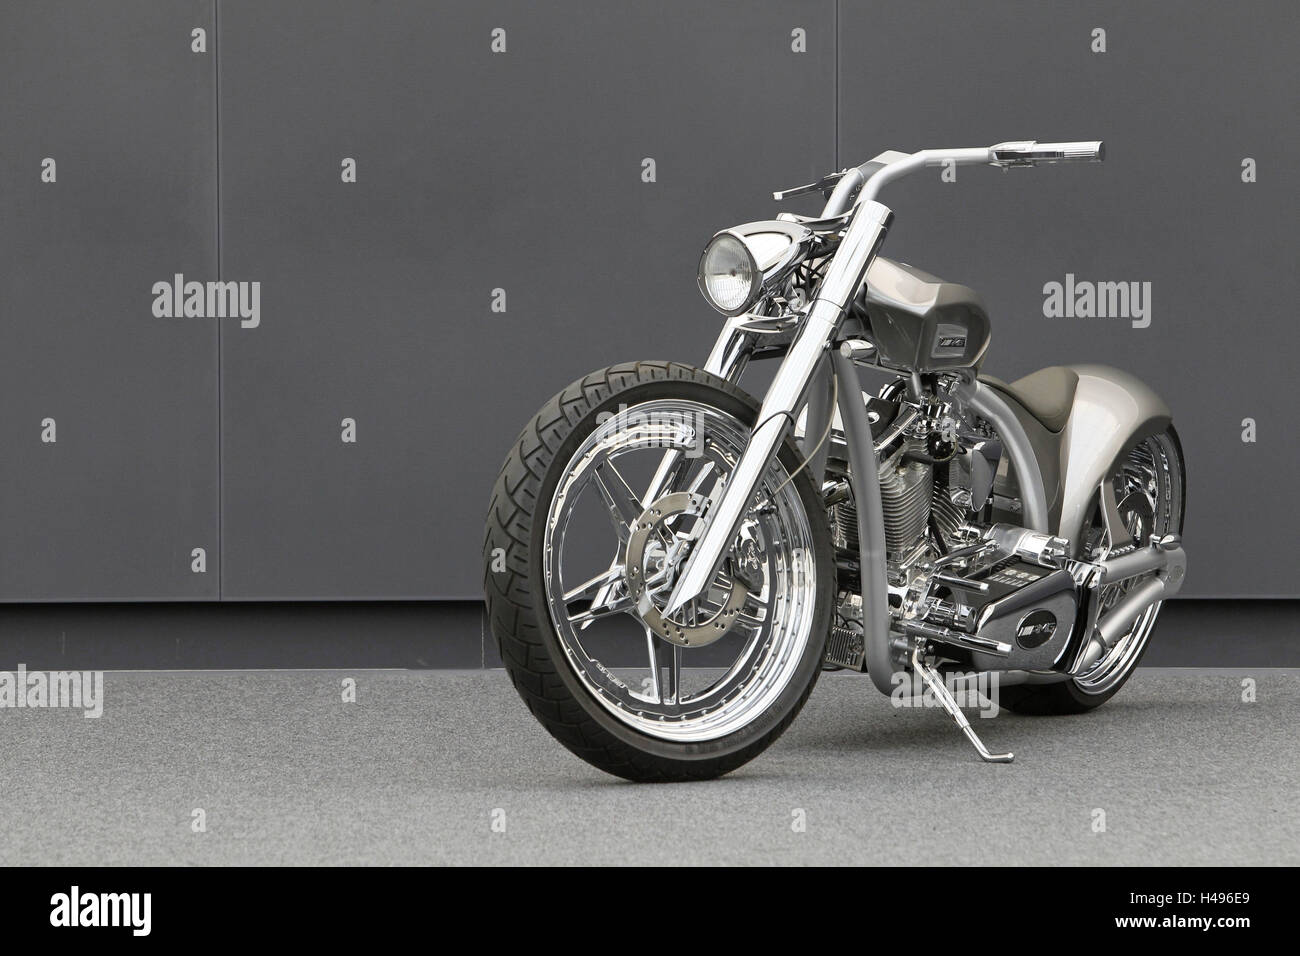 Motorcycle, chopper AMG, diagonal, tilted front view, silver, design motorcycle, Stock Photo